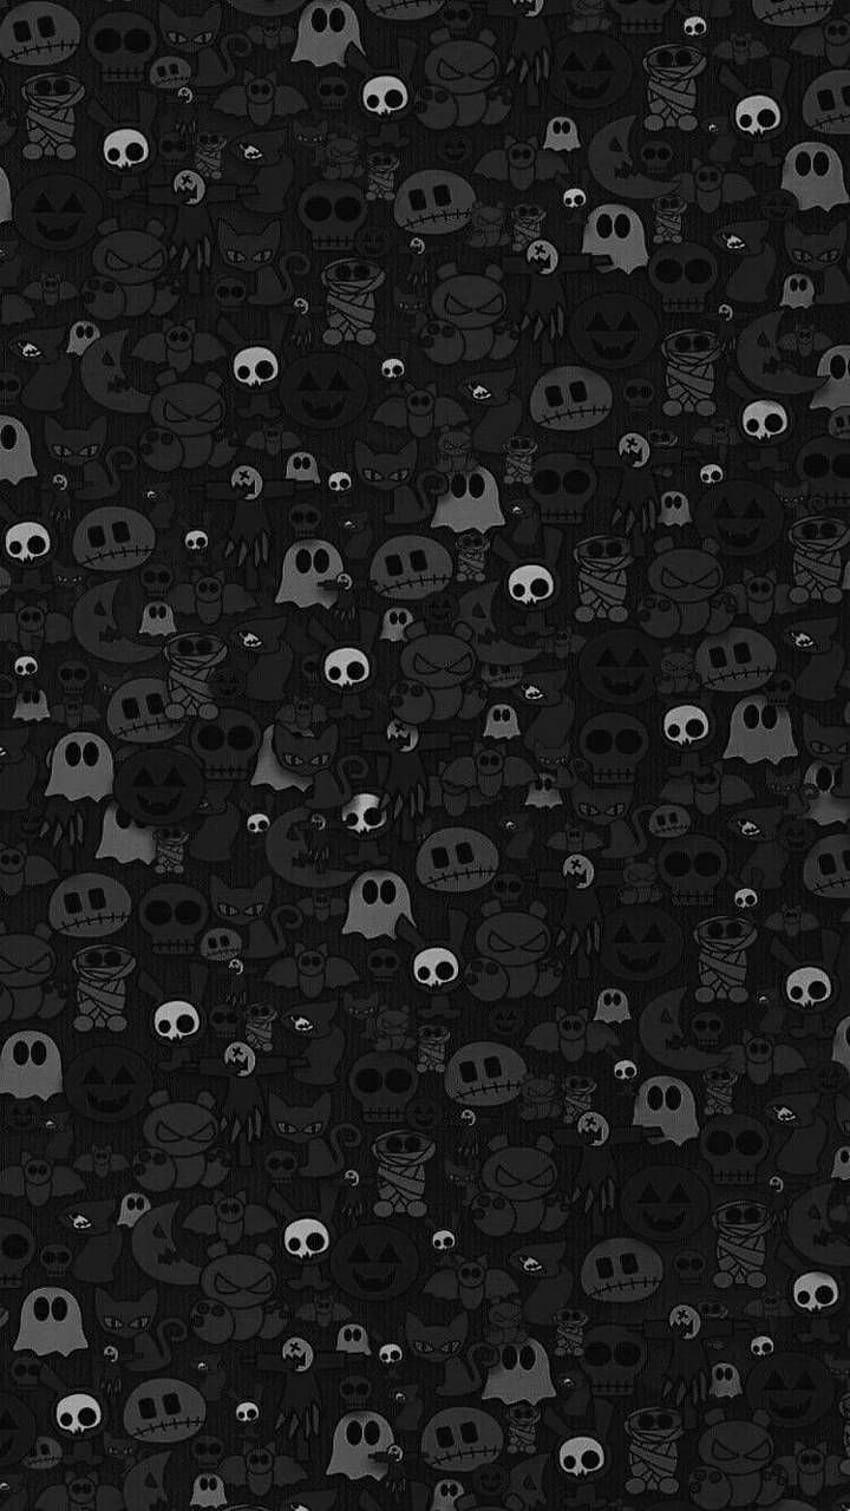 Black and white halloween background Royalty Free Vector